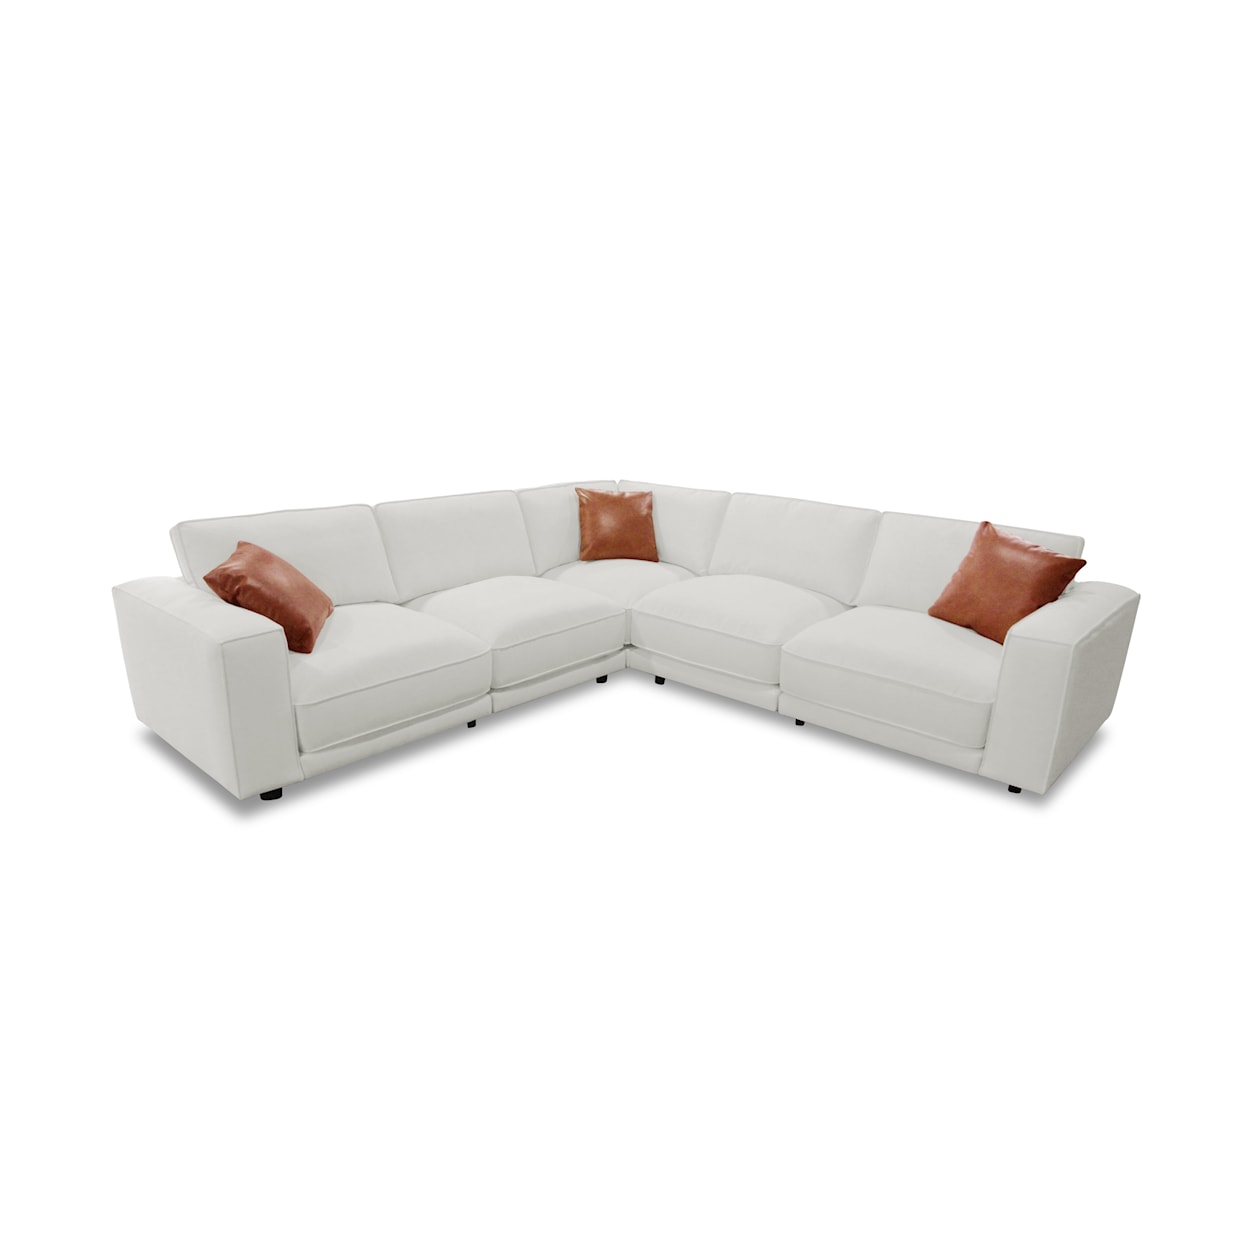 K.C. Kyren with Crypton Home Performance Fabric 5-Piece Modular Sectional